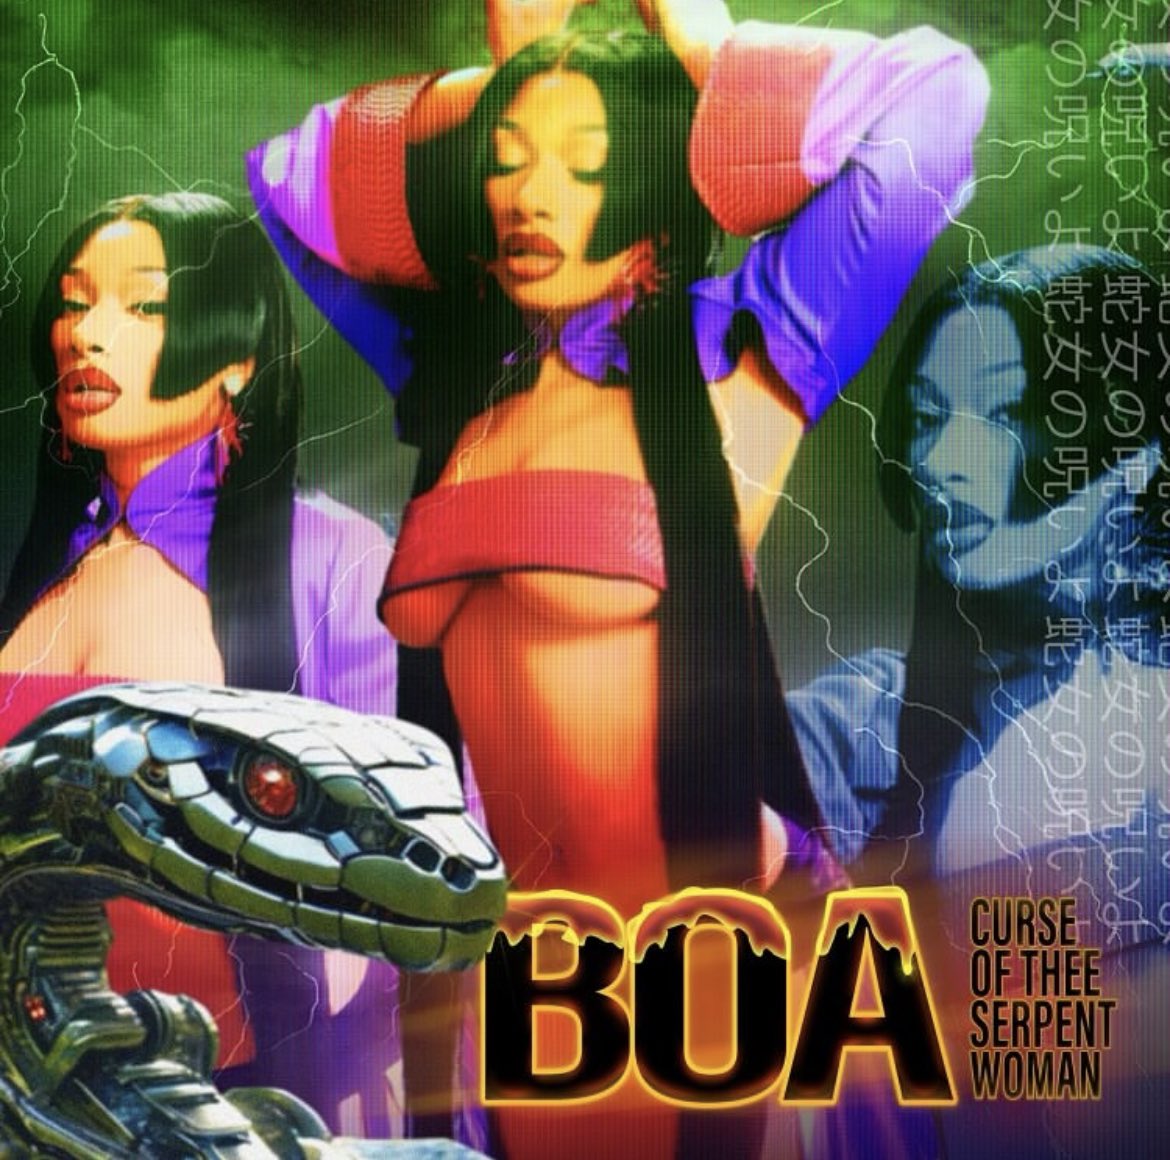 Megan Thee Stallion announces new single ‘BOA’ out this Friday, May 10th.